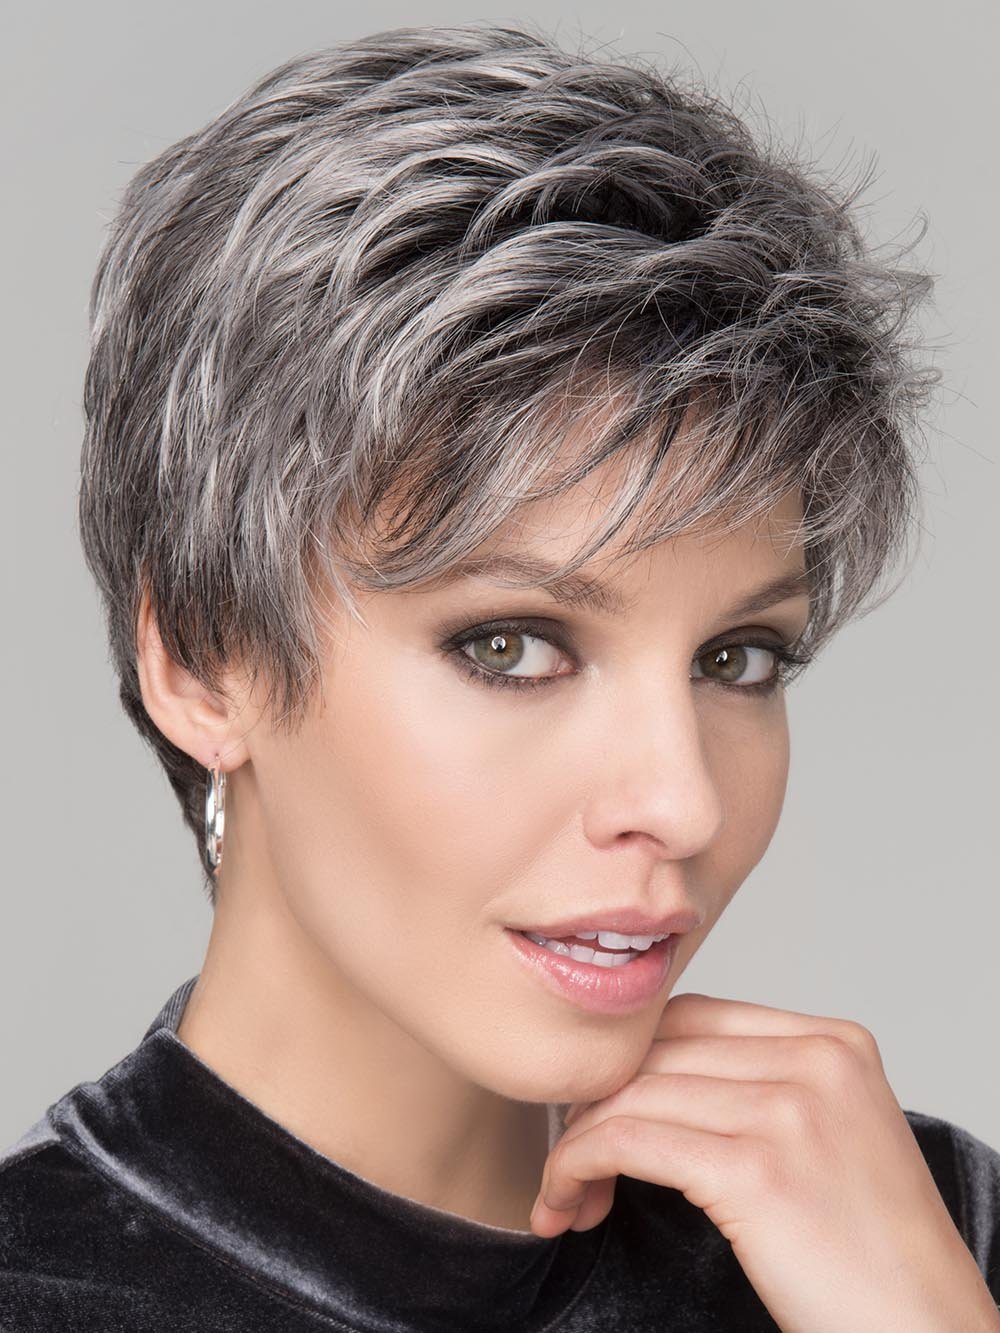 SPRING HI Wig by ELLEN WILLE in SALT/PEPPER MIX | Light Natural Brown with 75% Gray, Medium Brown with 70% Gray and Pure White Blend